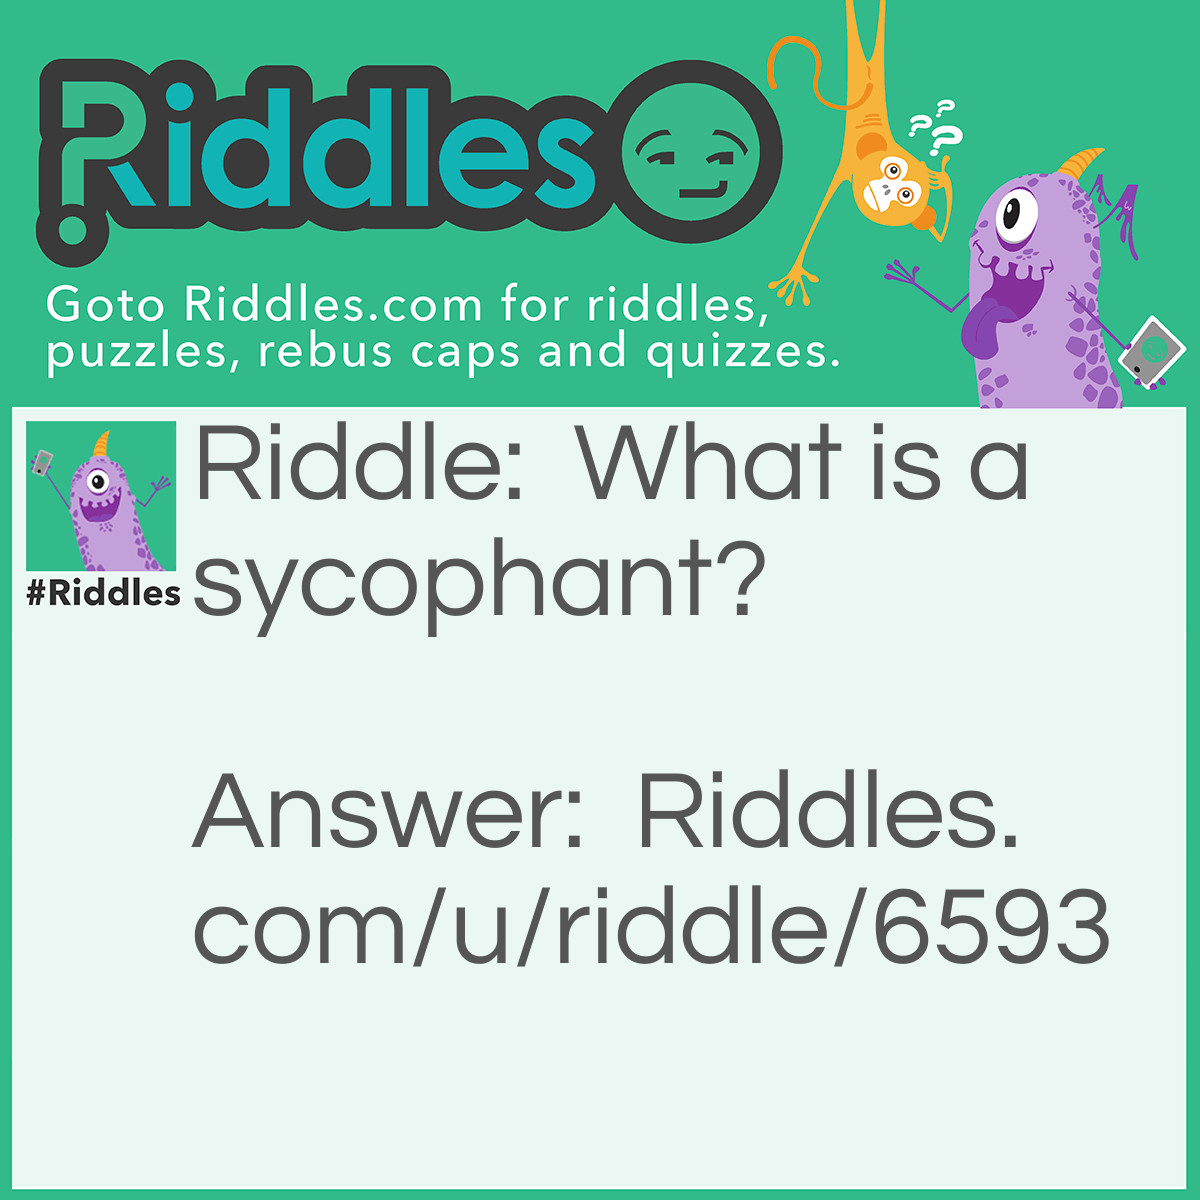 Riddle: What is a sycophant? Answer: An unhealthy pachyderm.